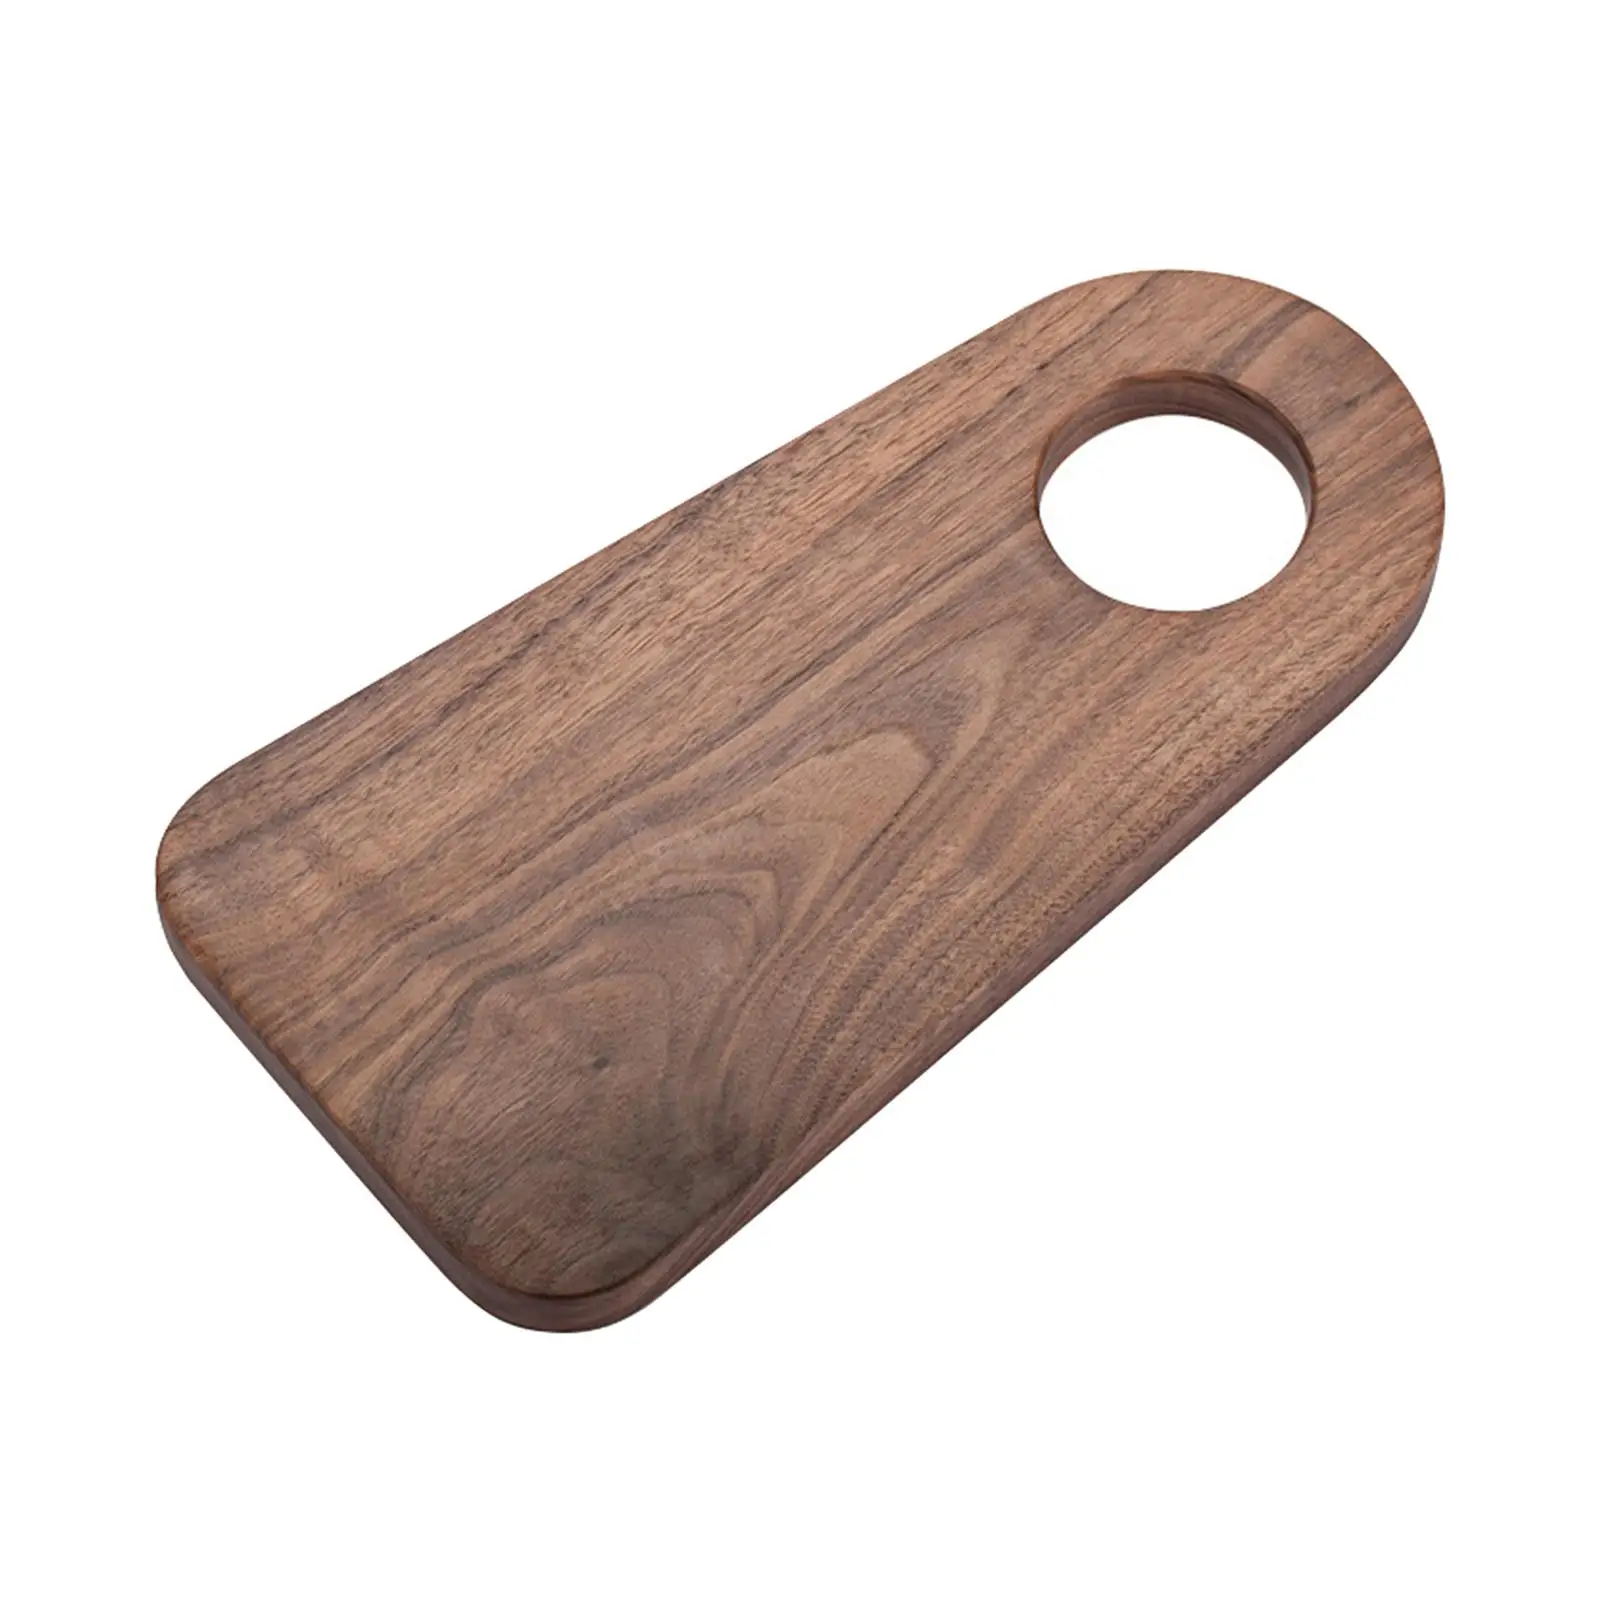 Wood Chopping Board Utensils Food Serving Tray Cheese Board Kitchen Tools Serving Board Cutting Board for Steak Bread Vegetables